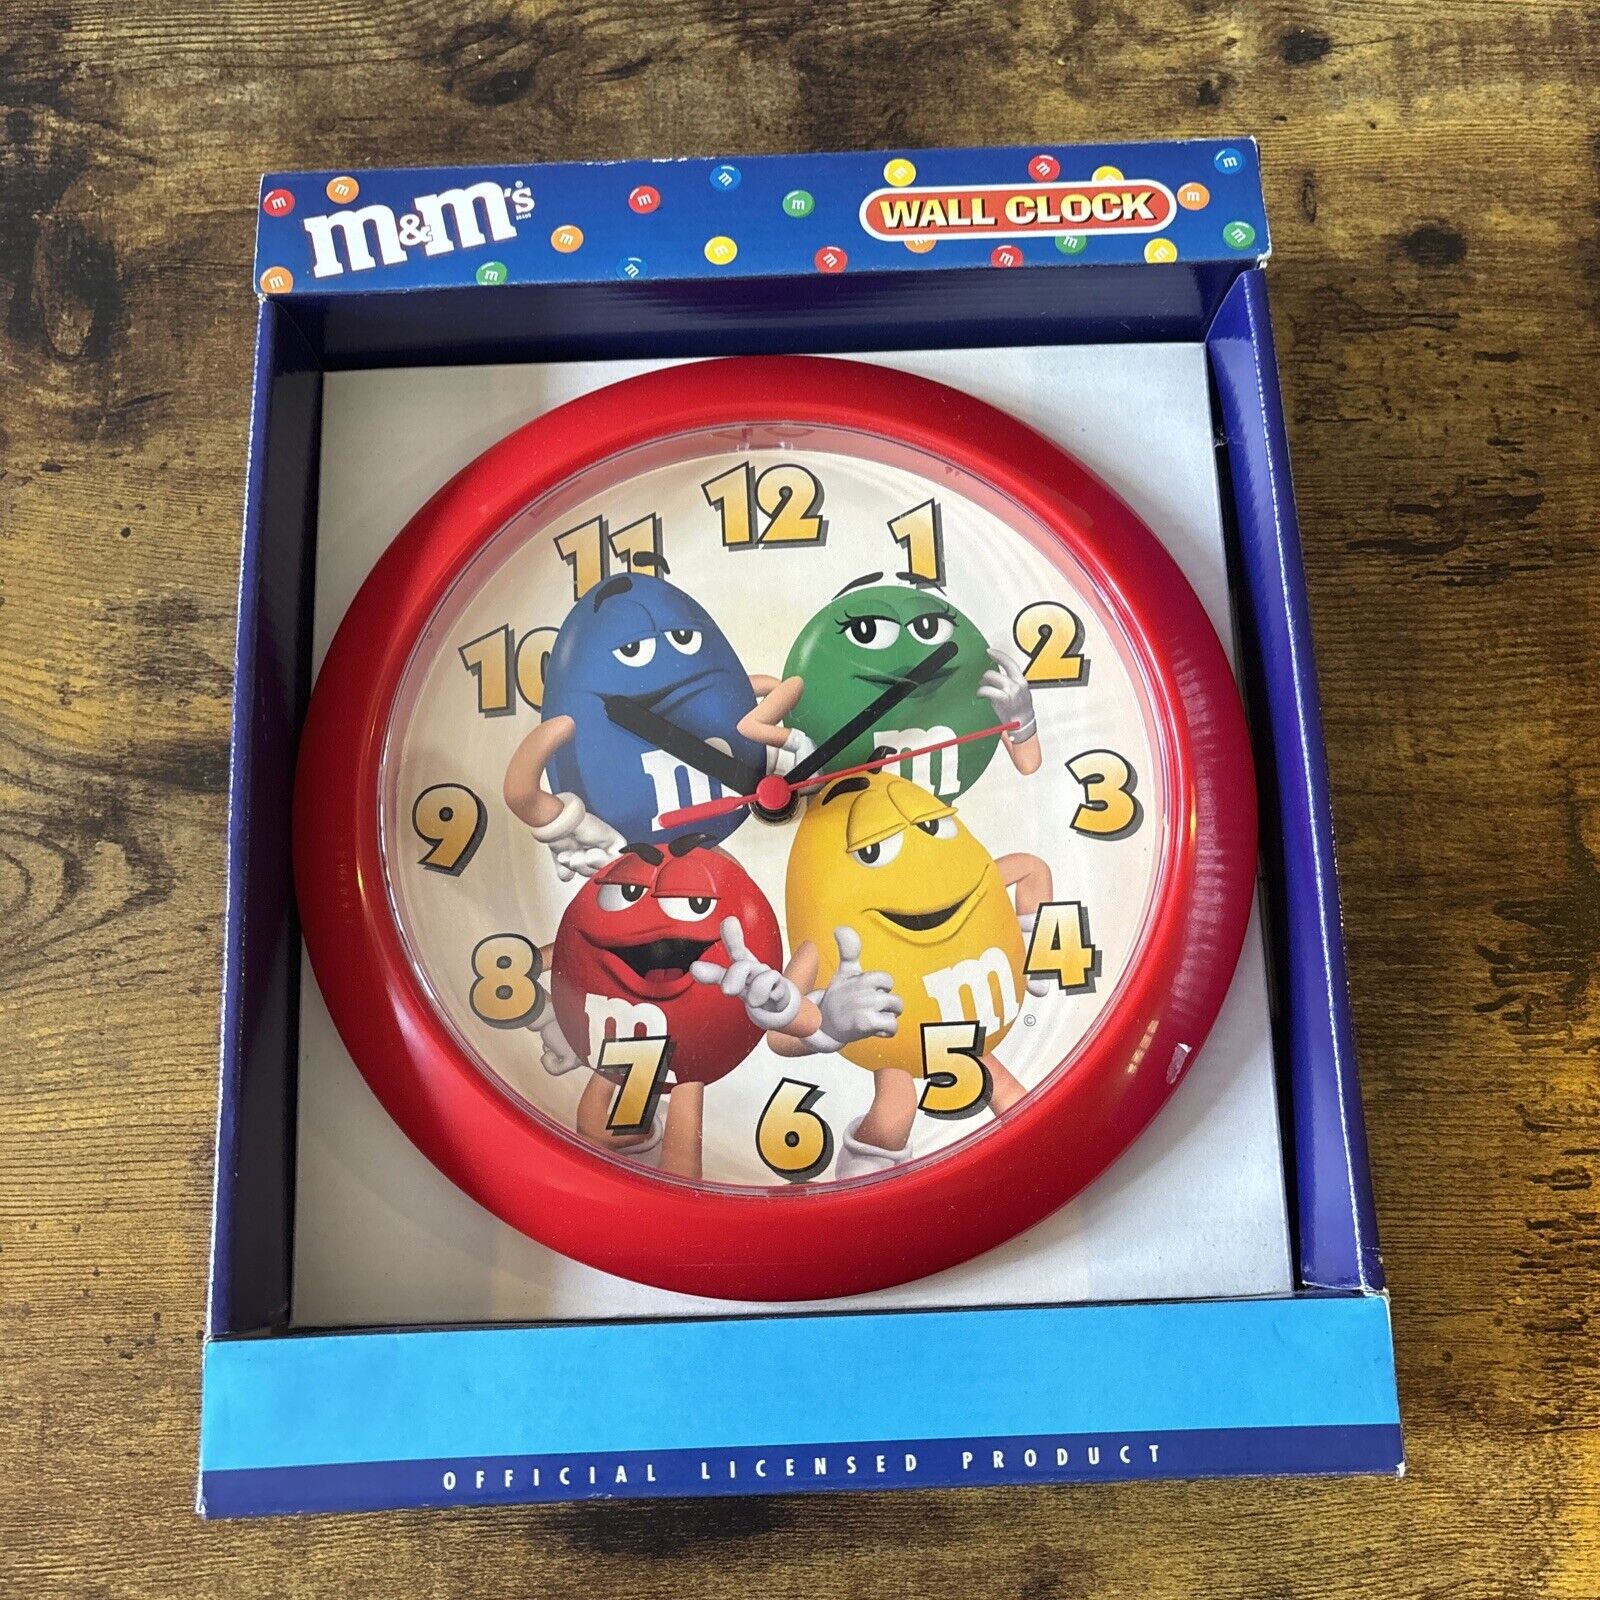 Retro Vintage M&M's Analogue Wall Clock Battery Powered M&Ms New In Box untested